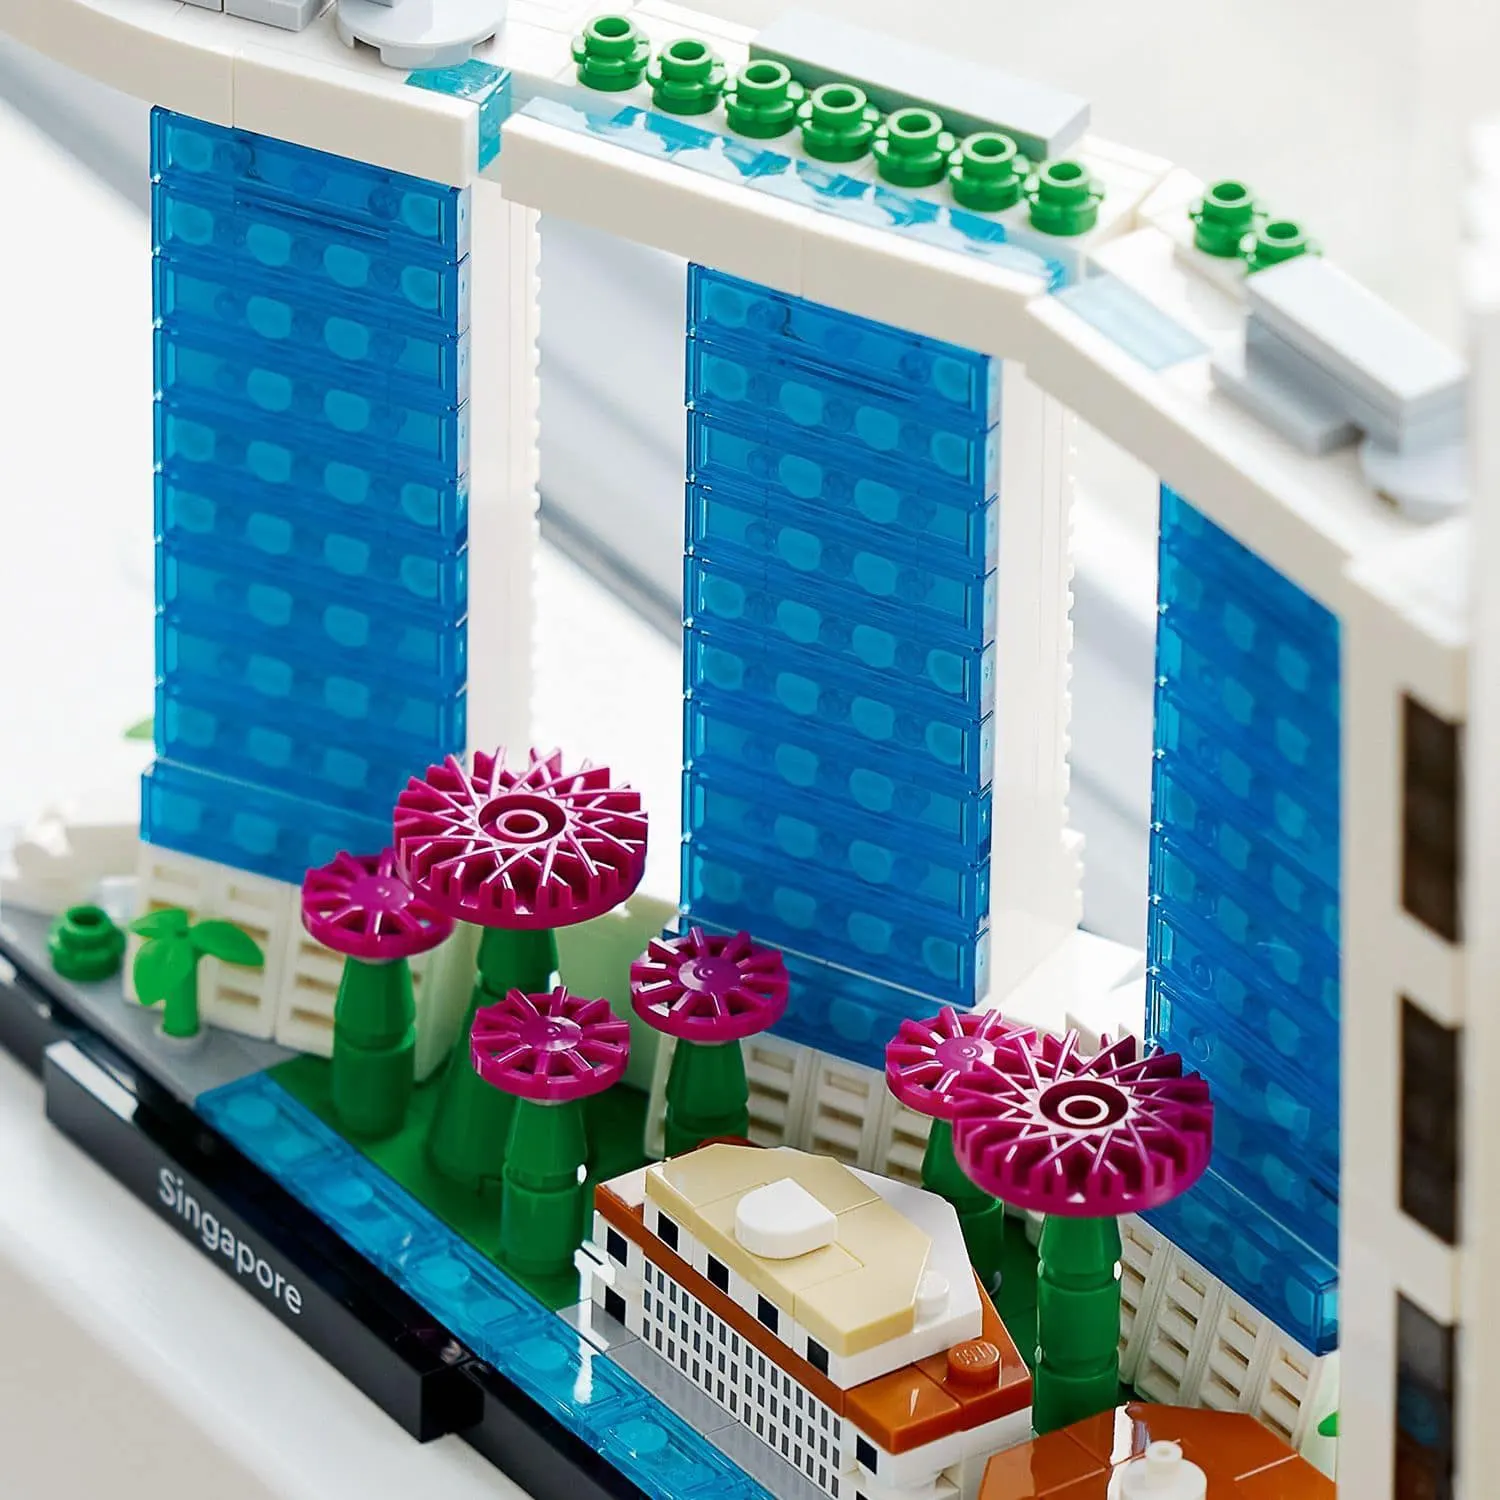 LEGO 21057 Singpore Architecutre New Products for Jan. 1st 2022 Revealed